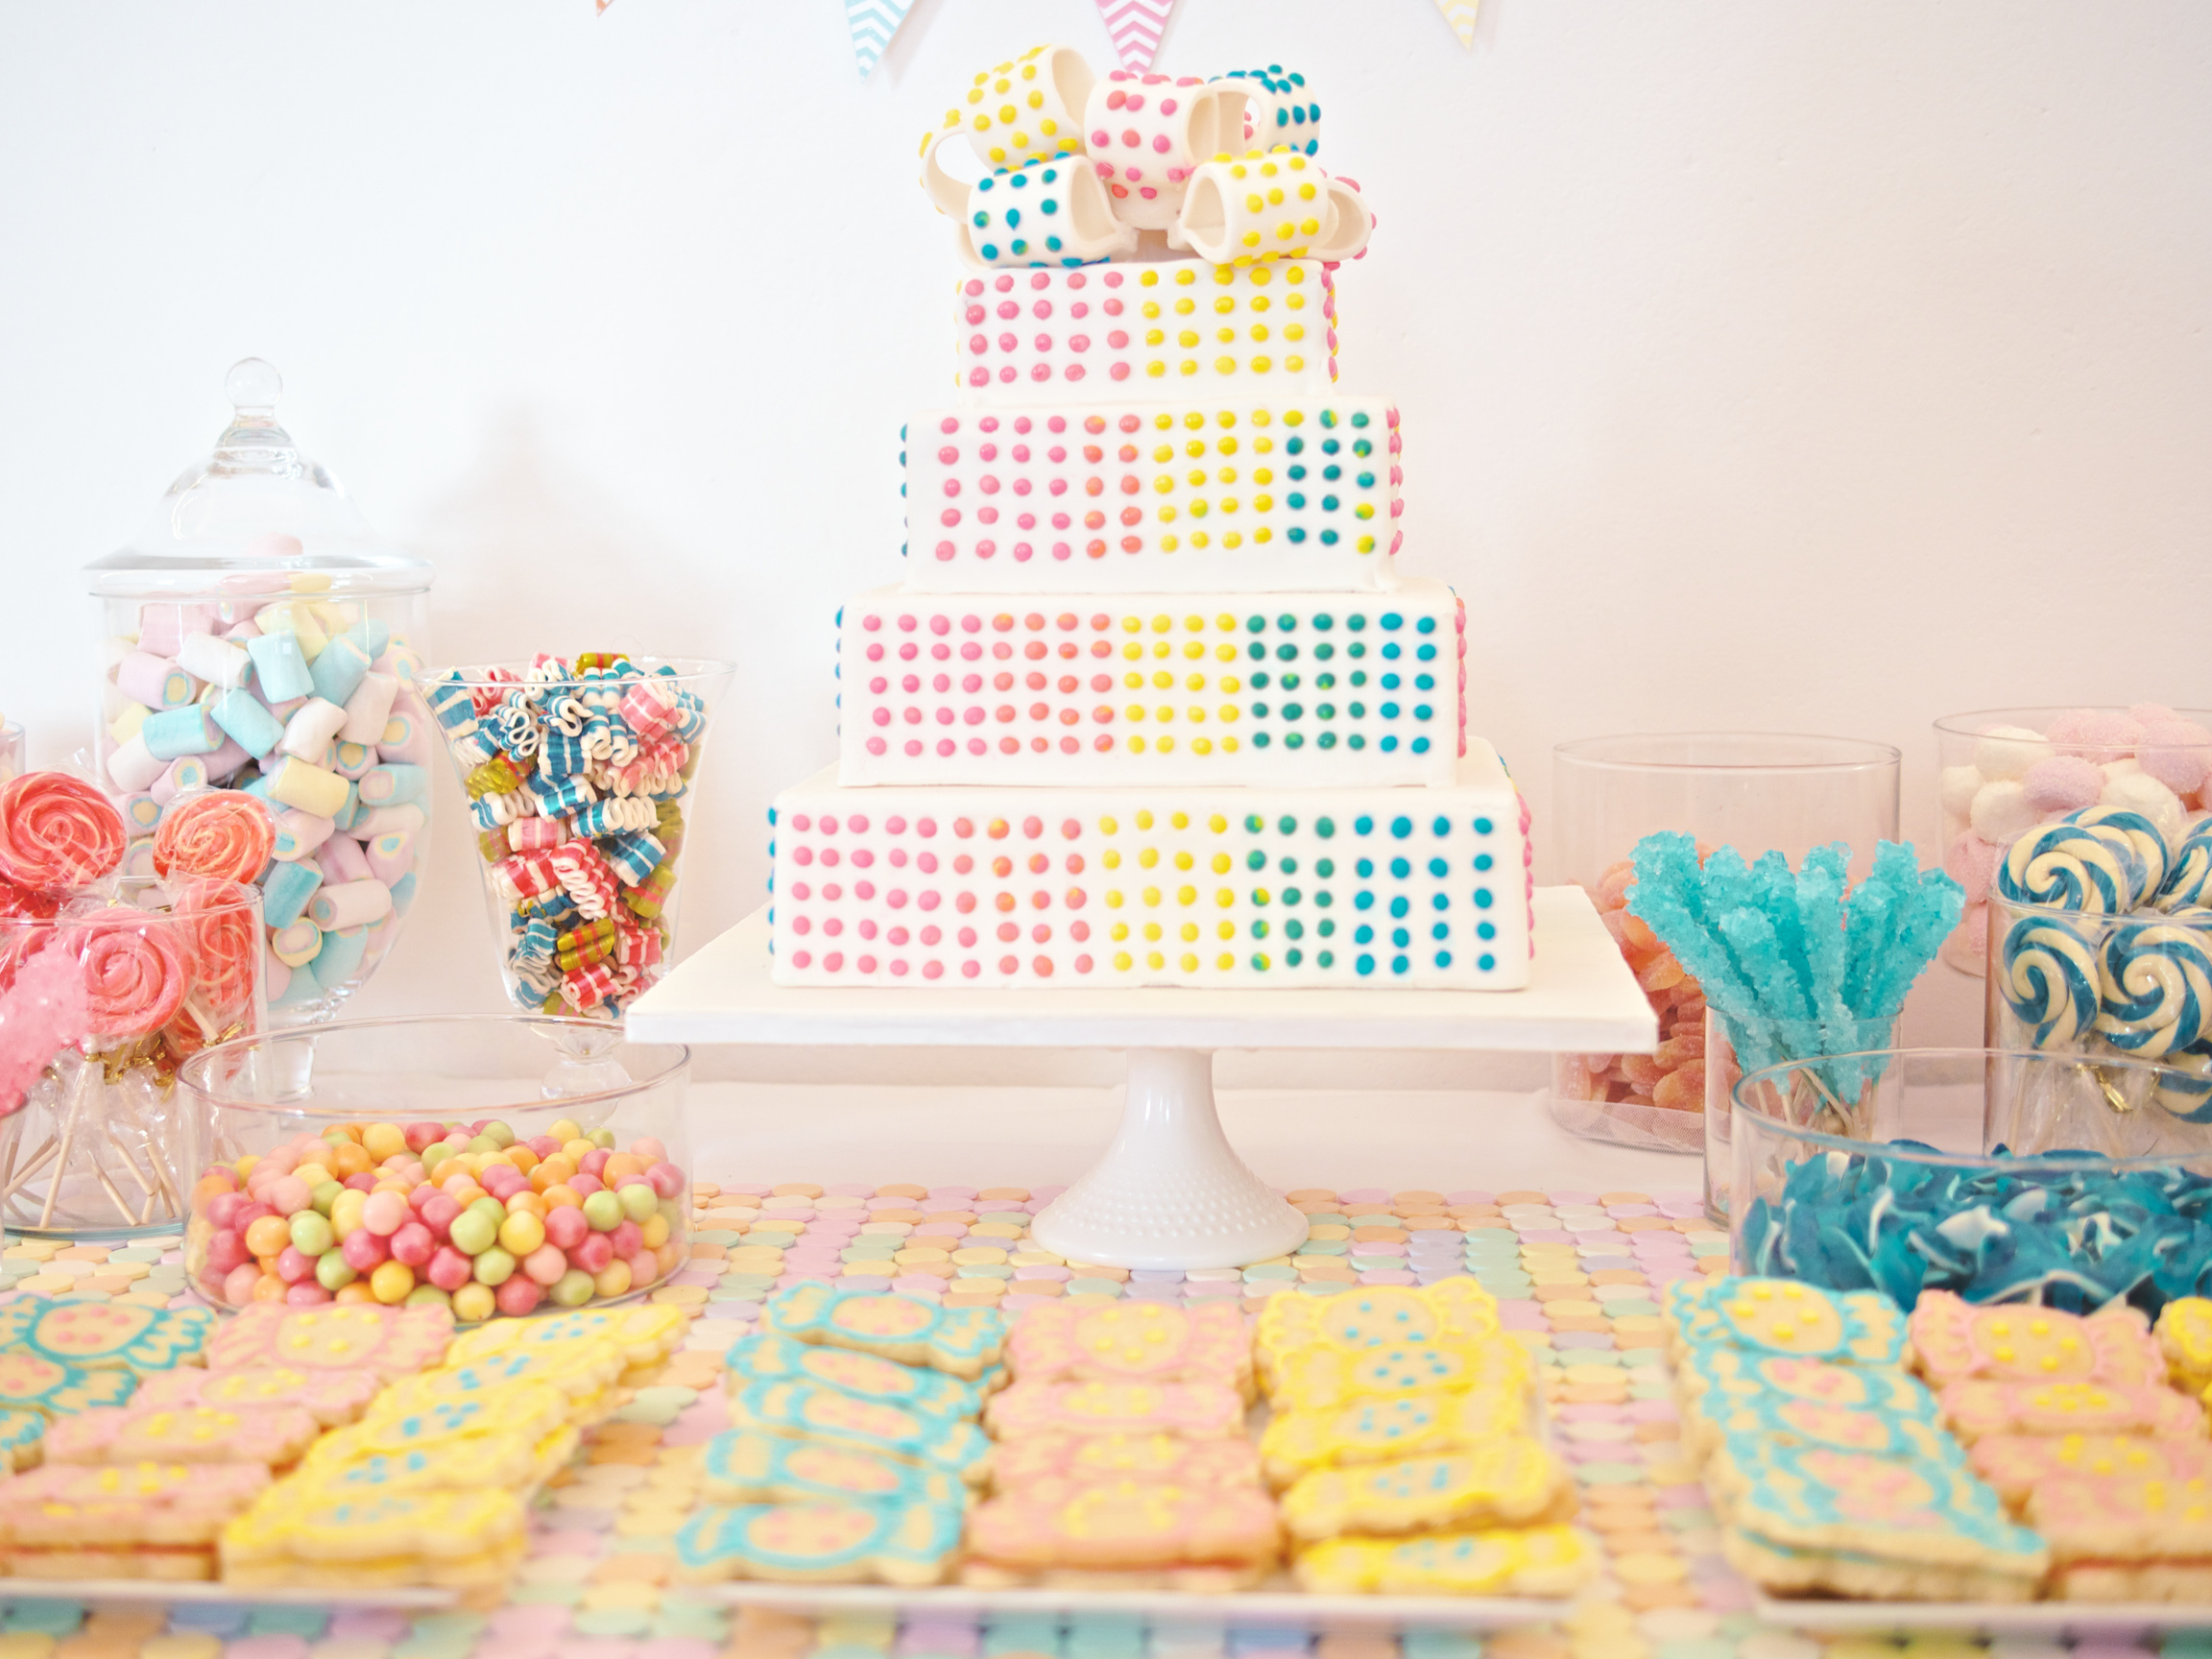 Baby party table setting with cake and candies